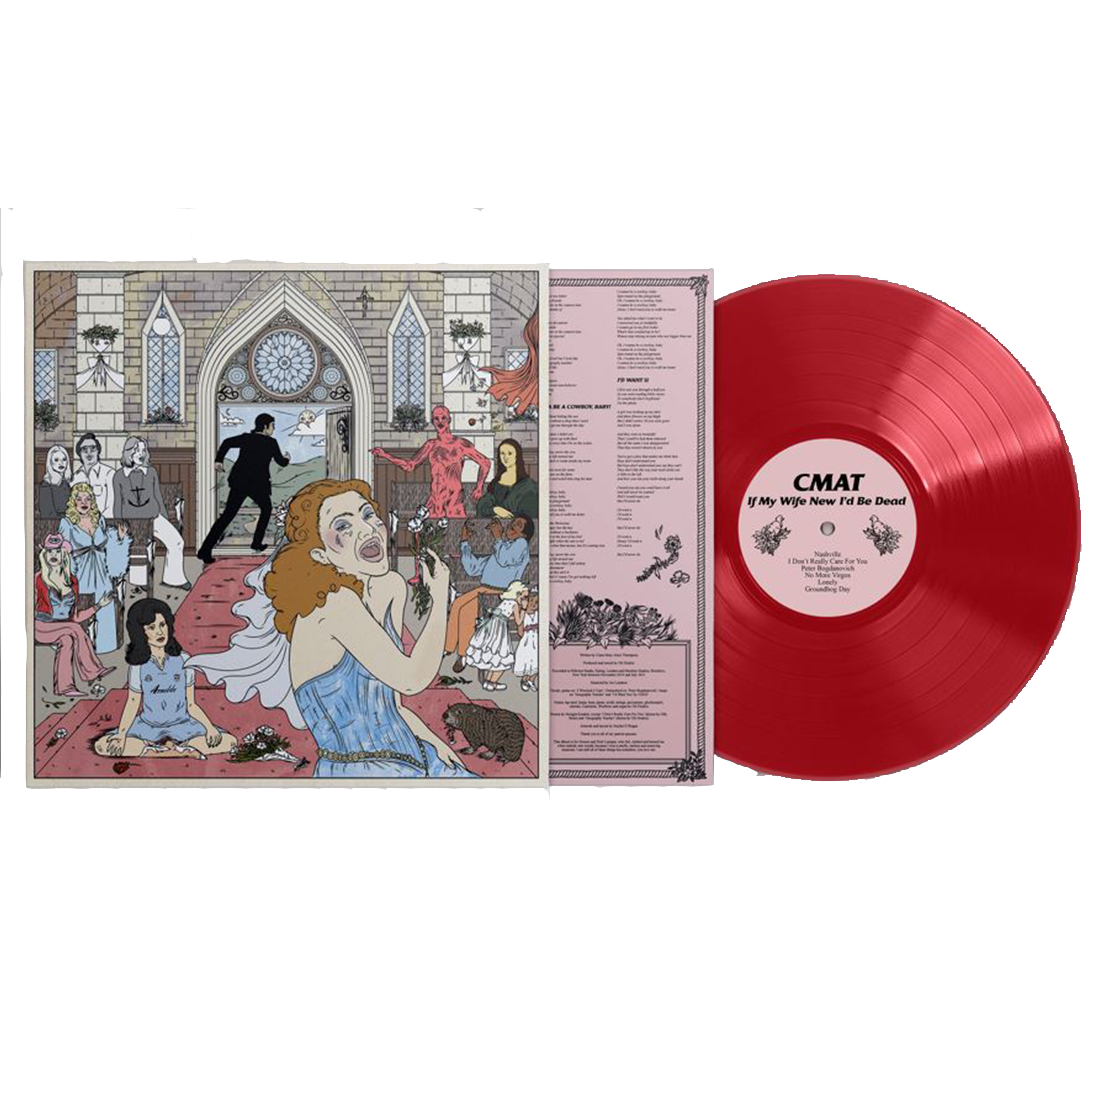 CMAT - If My Wife New, I'd Be Dead: Limited Edition Red LP